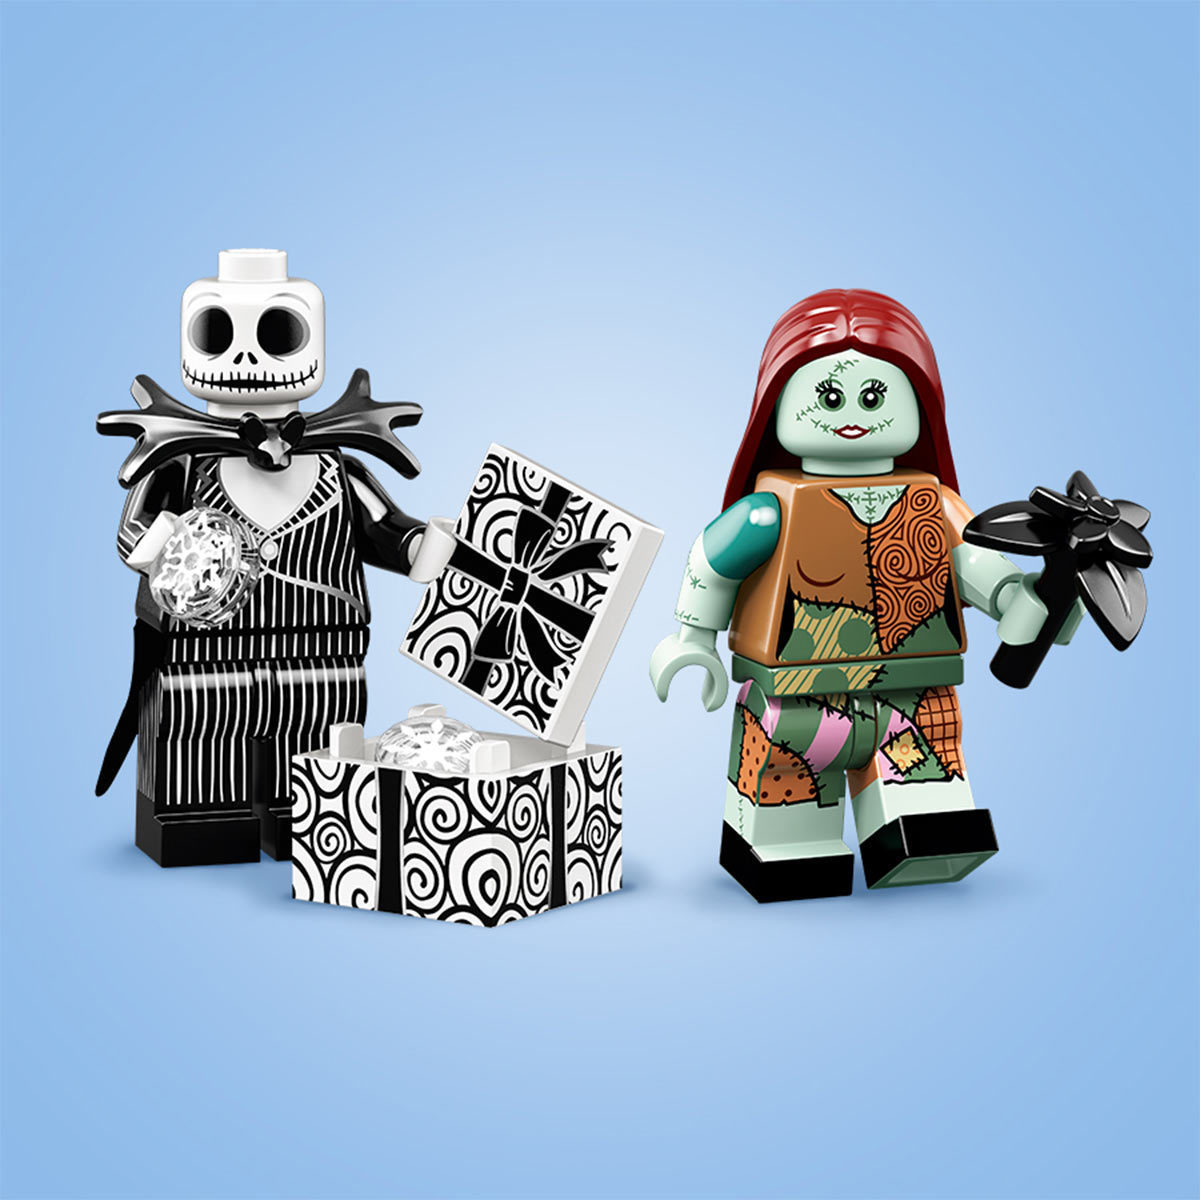 Jack and Sally lego Minifigures close up